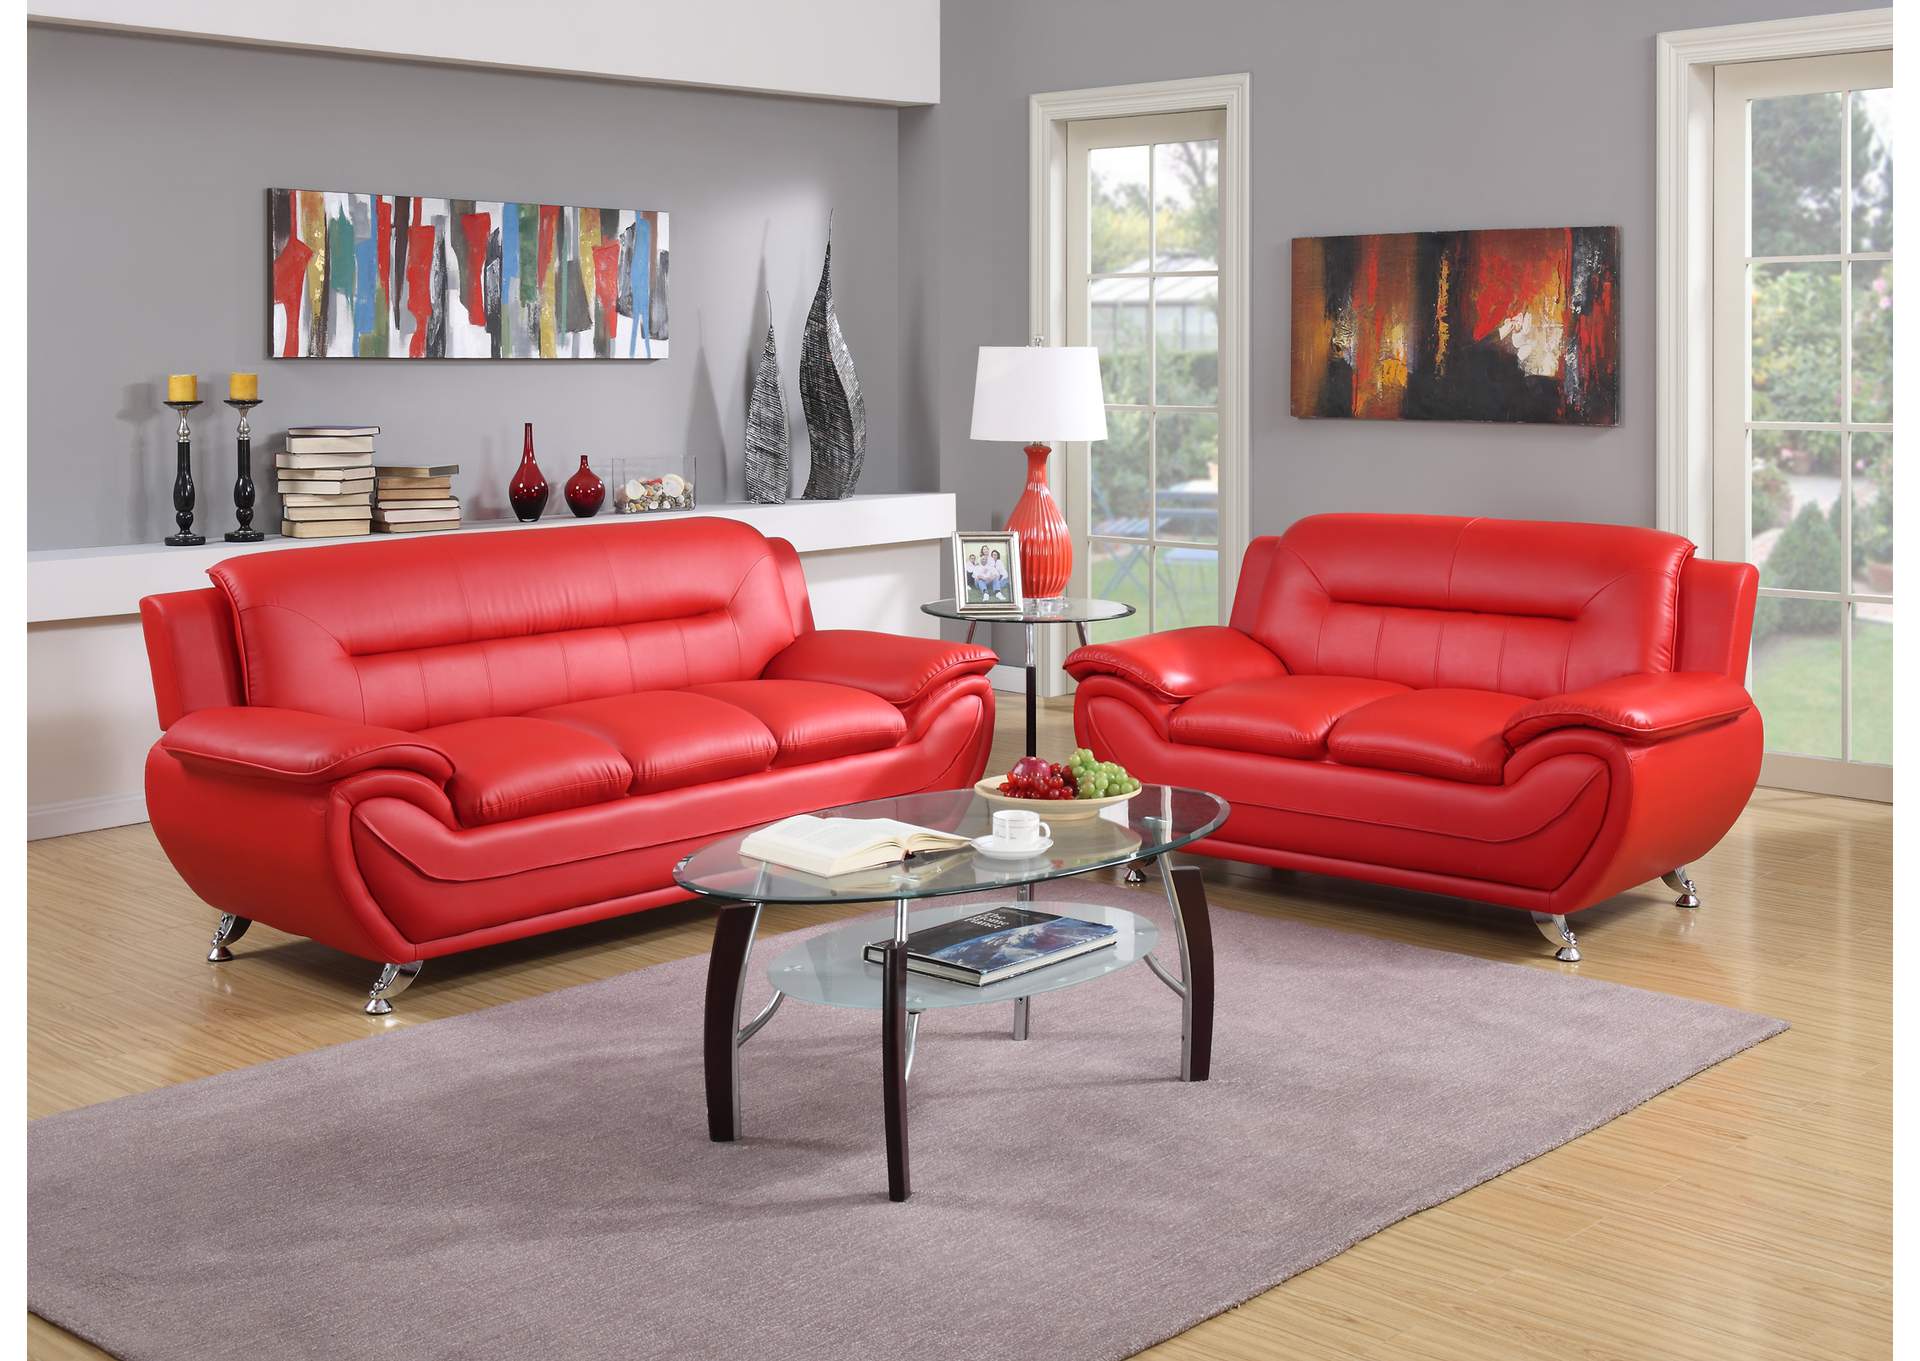 U2703 Red Faux Leather Sofa And Loveseat,Global Trading